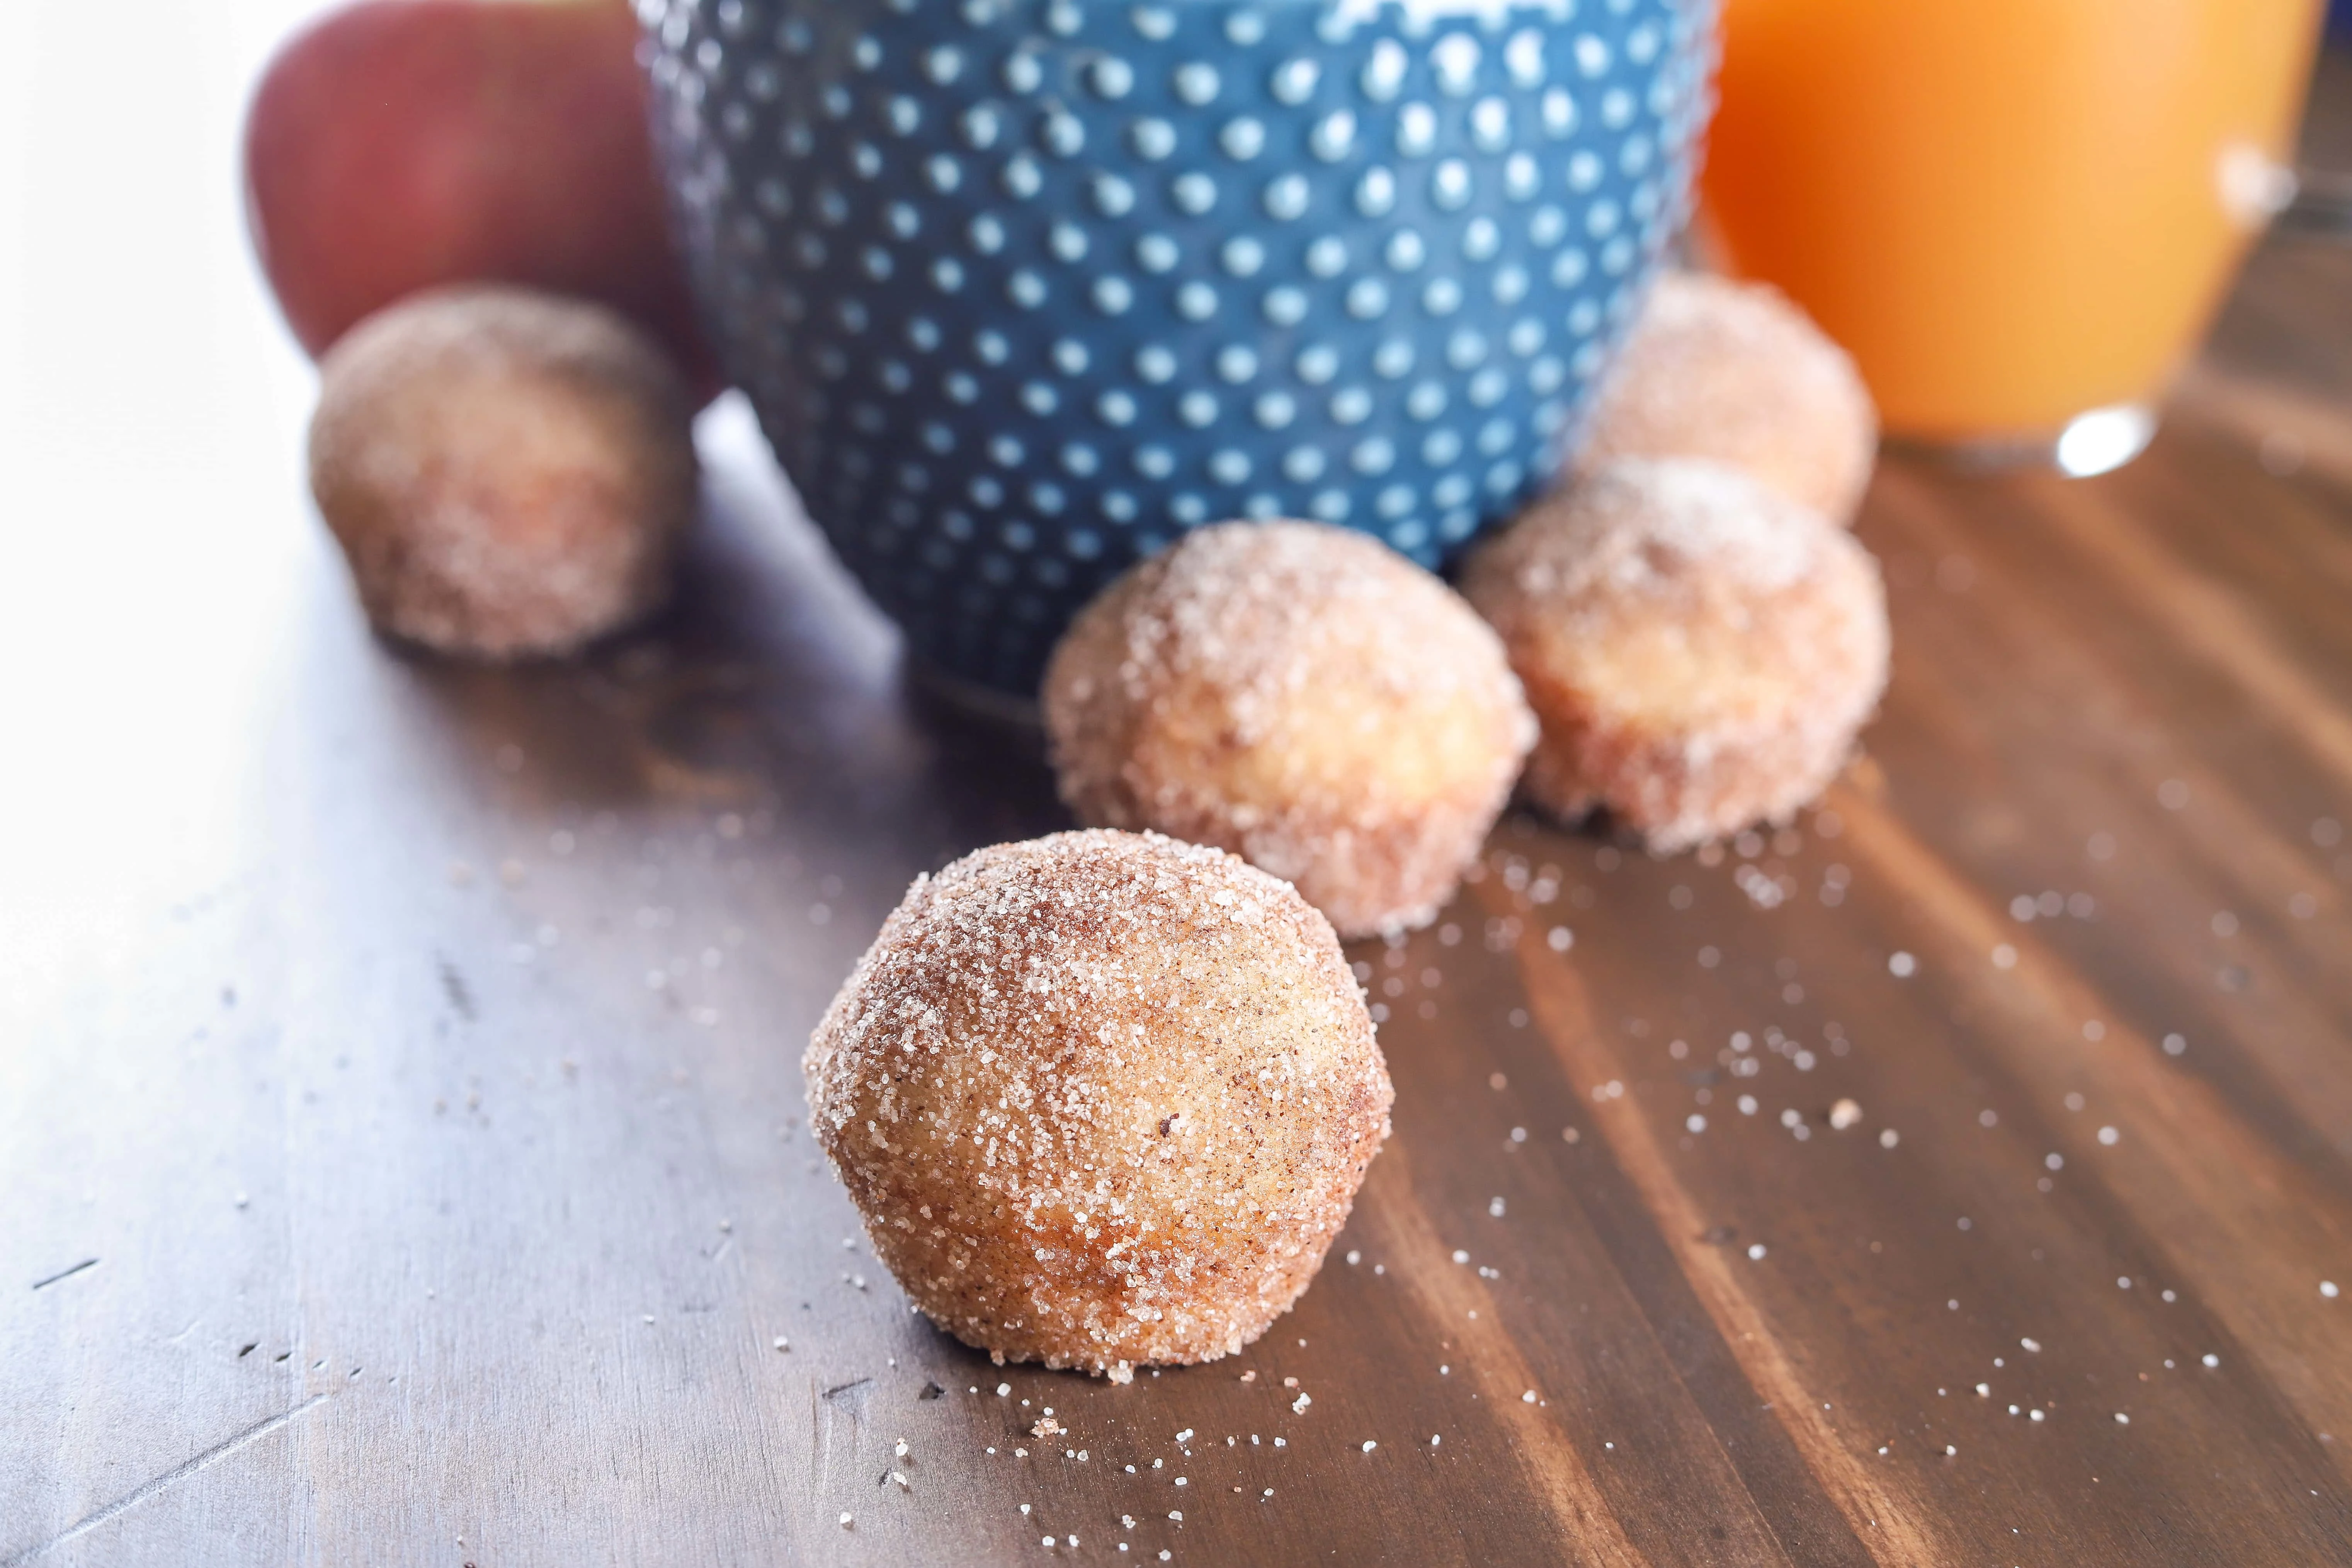 Spiced Apple Cider Mini Donut Muffins with a glass of apple cider. Recipe from A Kitchen Addiction